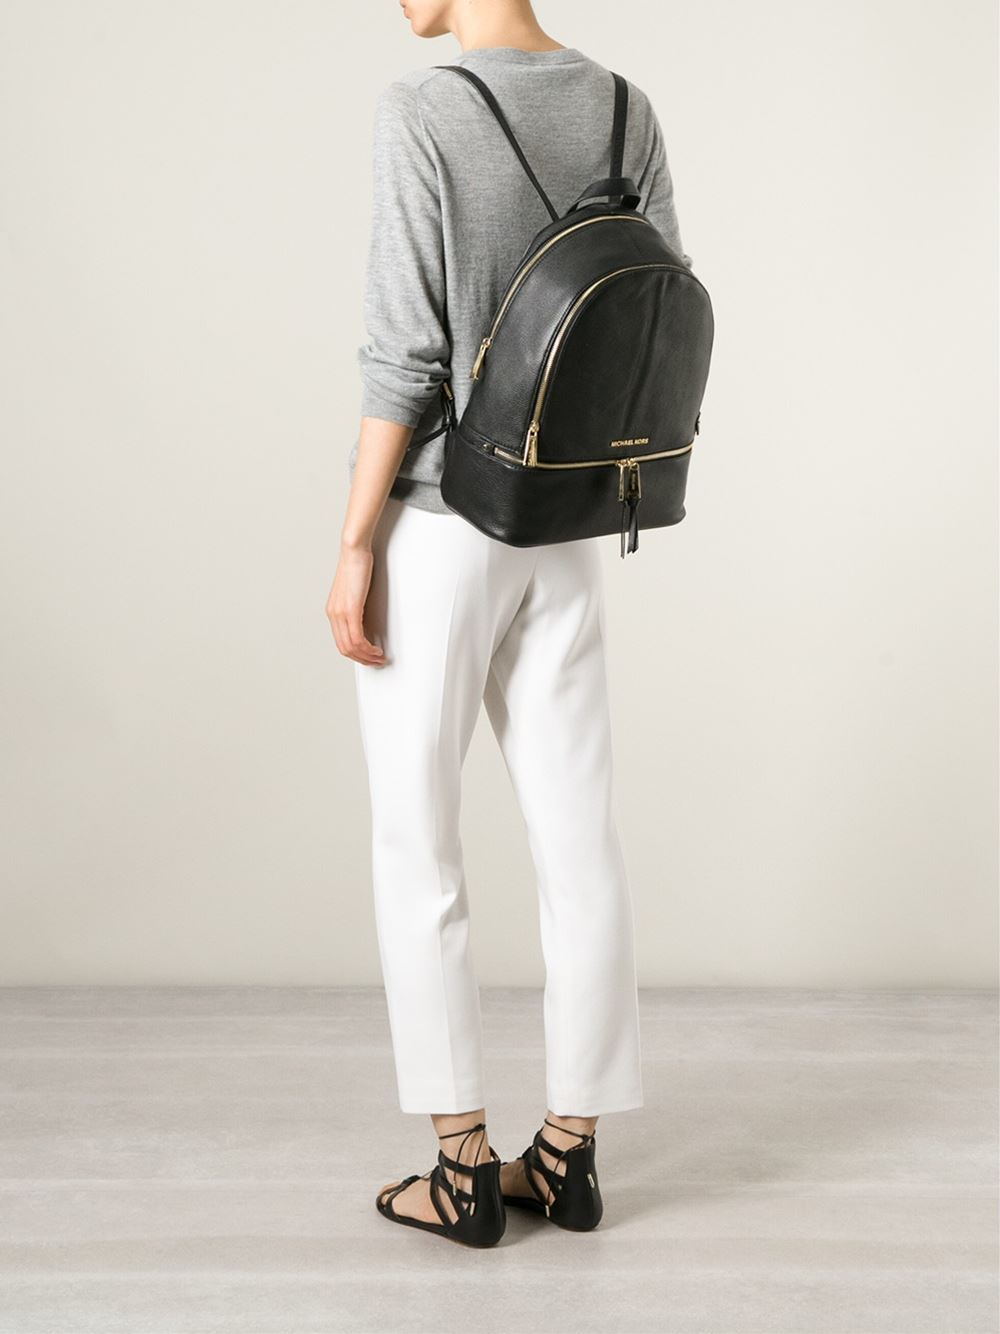 michael kors black and gold backpack